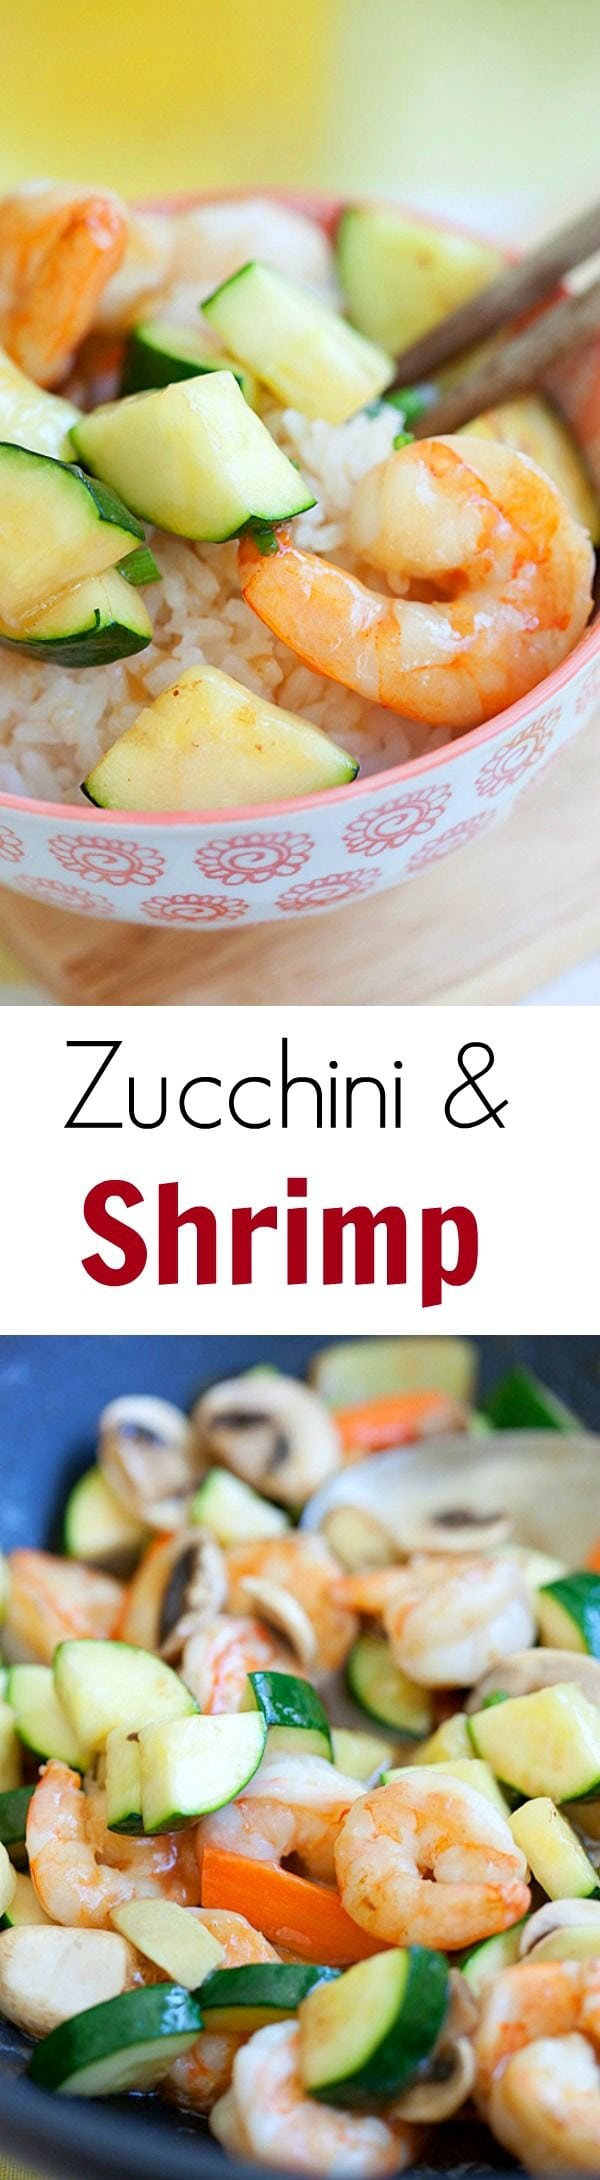 Zucchini and Shrimp Stir-Fry - Super easy, refreshing, yummy and takes less than 30 mins. Make it tonight for dinner!! | rasamalaysia.com